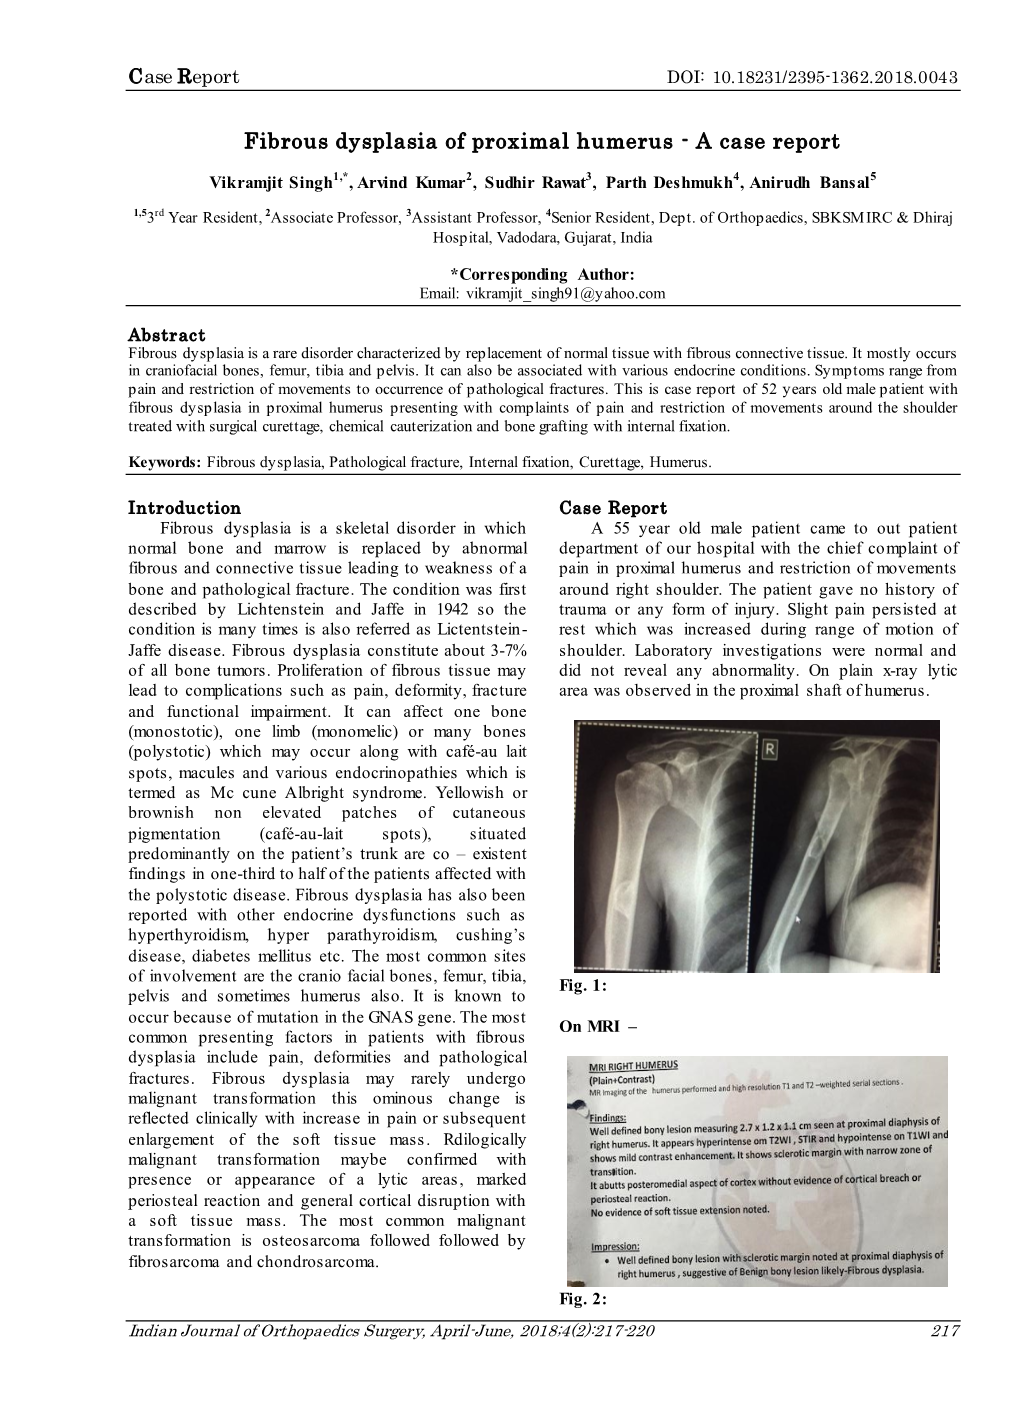 Fibrous Dysplasia of Proximal Humerus - a Case Report